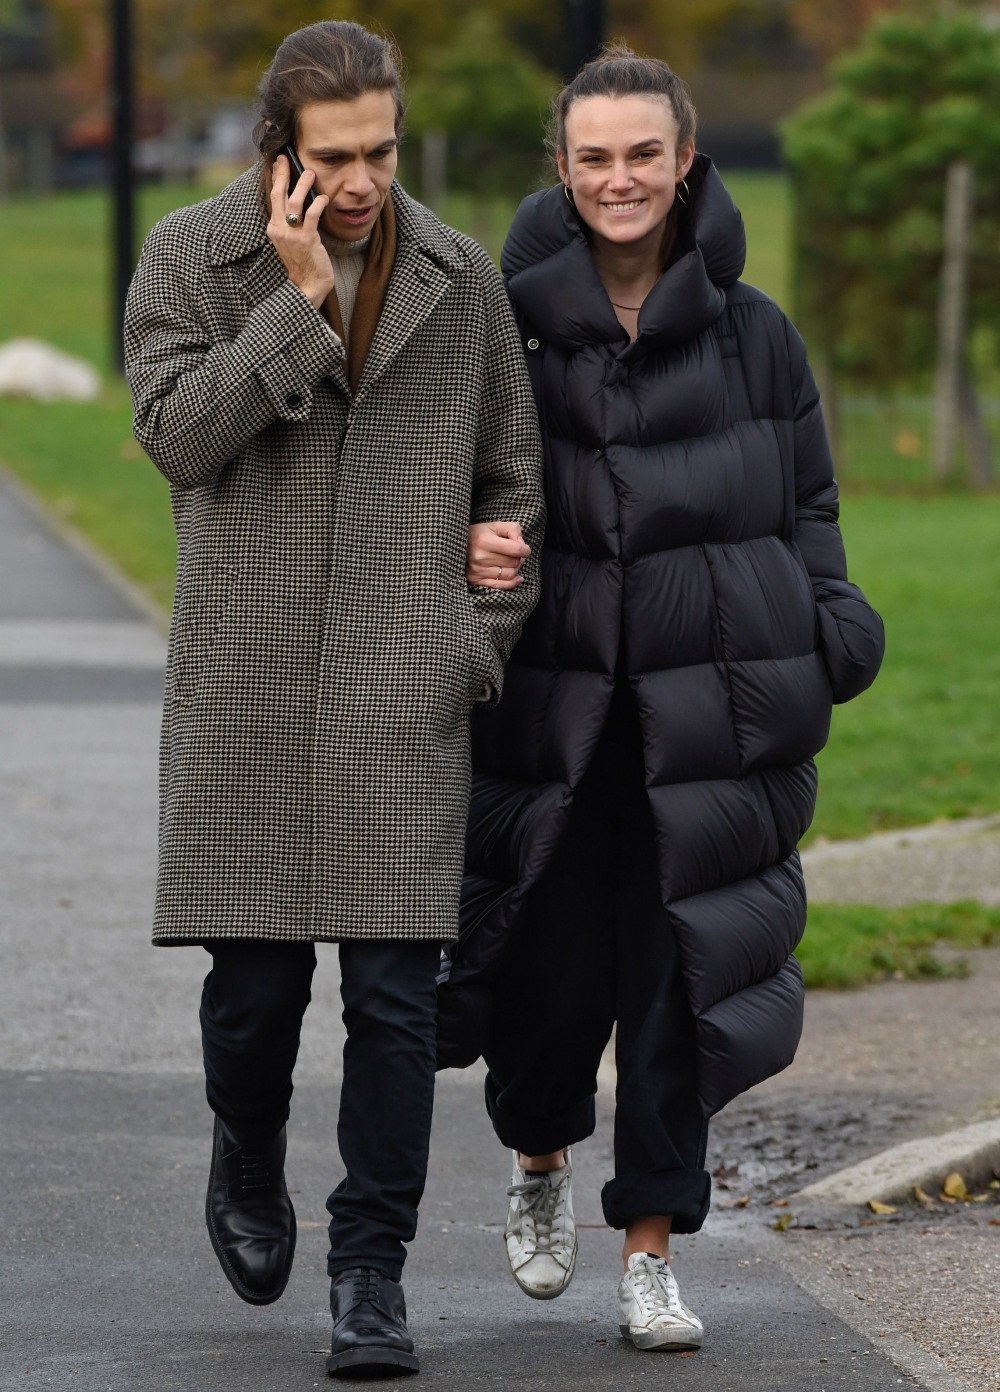 Keira Knightley and husband James Righton take a stroll in a park in London